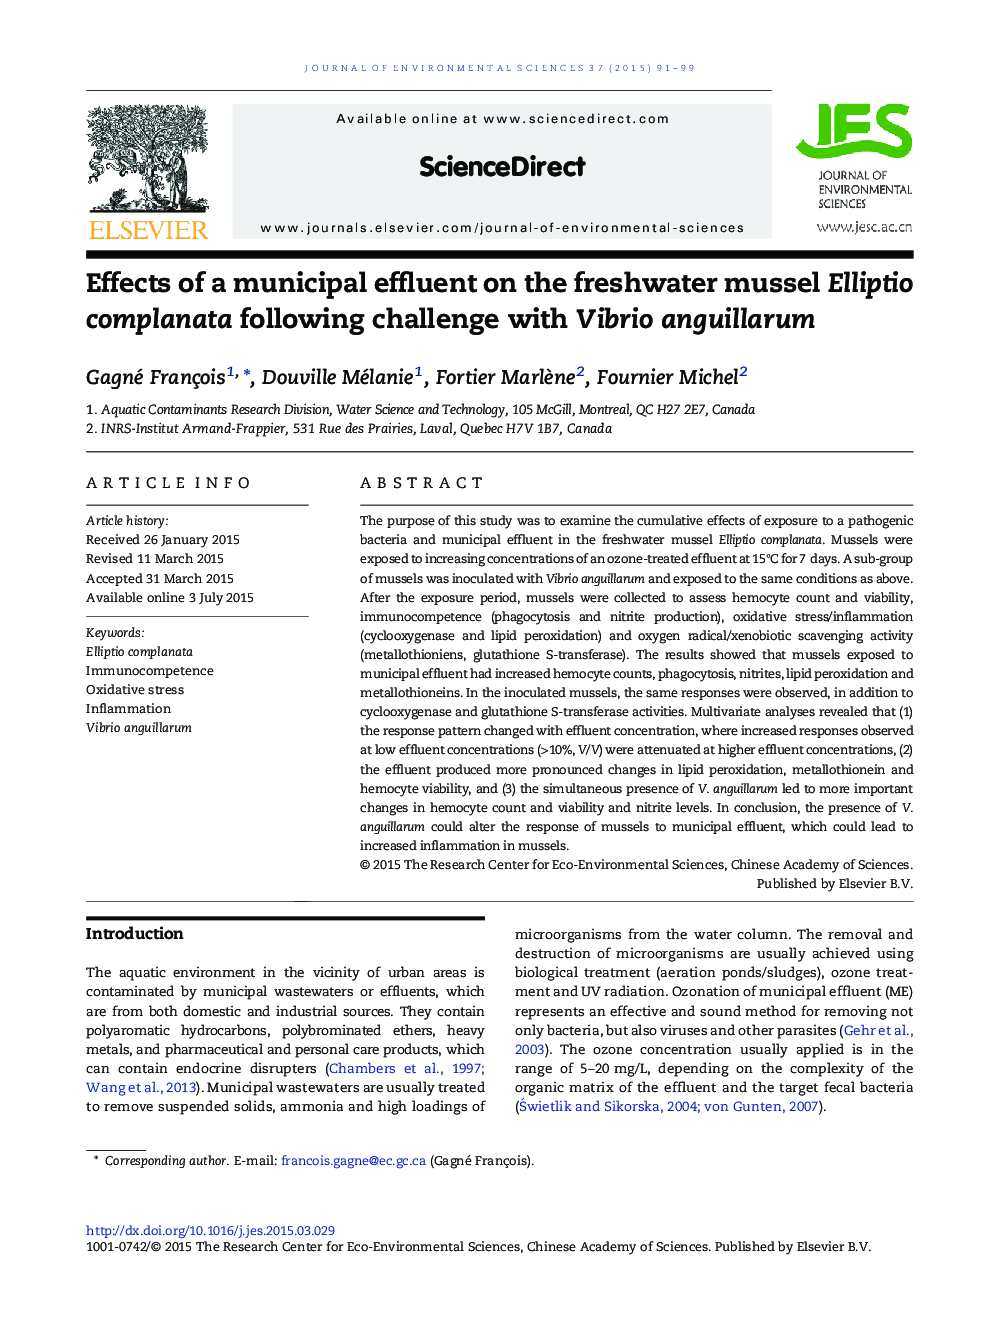 Effects of a municipal effluent on the freshwater mussel Elliptio complanata following challenge with Vibrio anguillarum